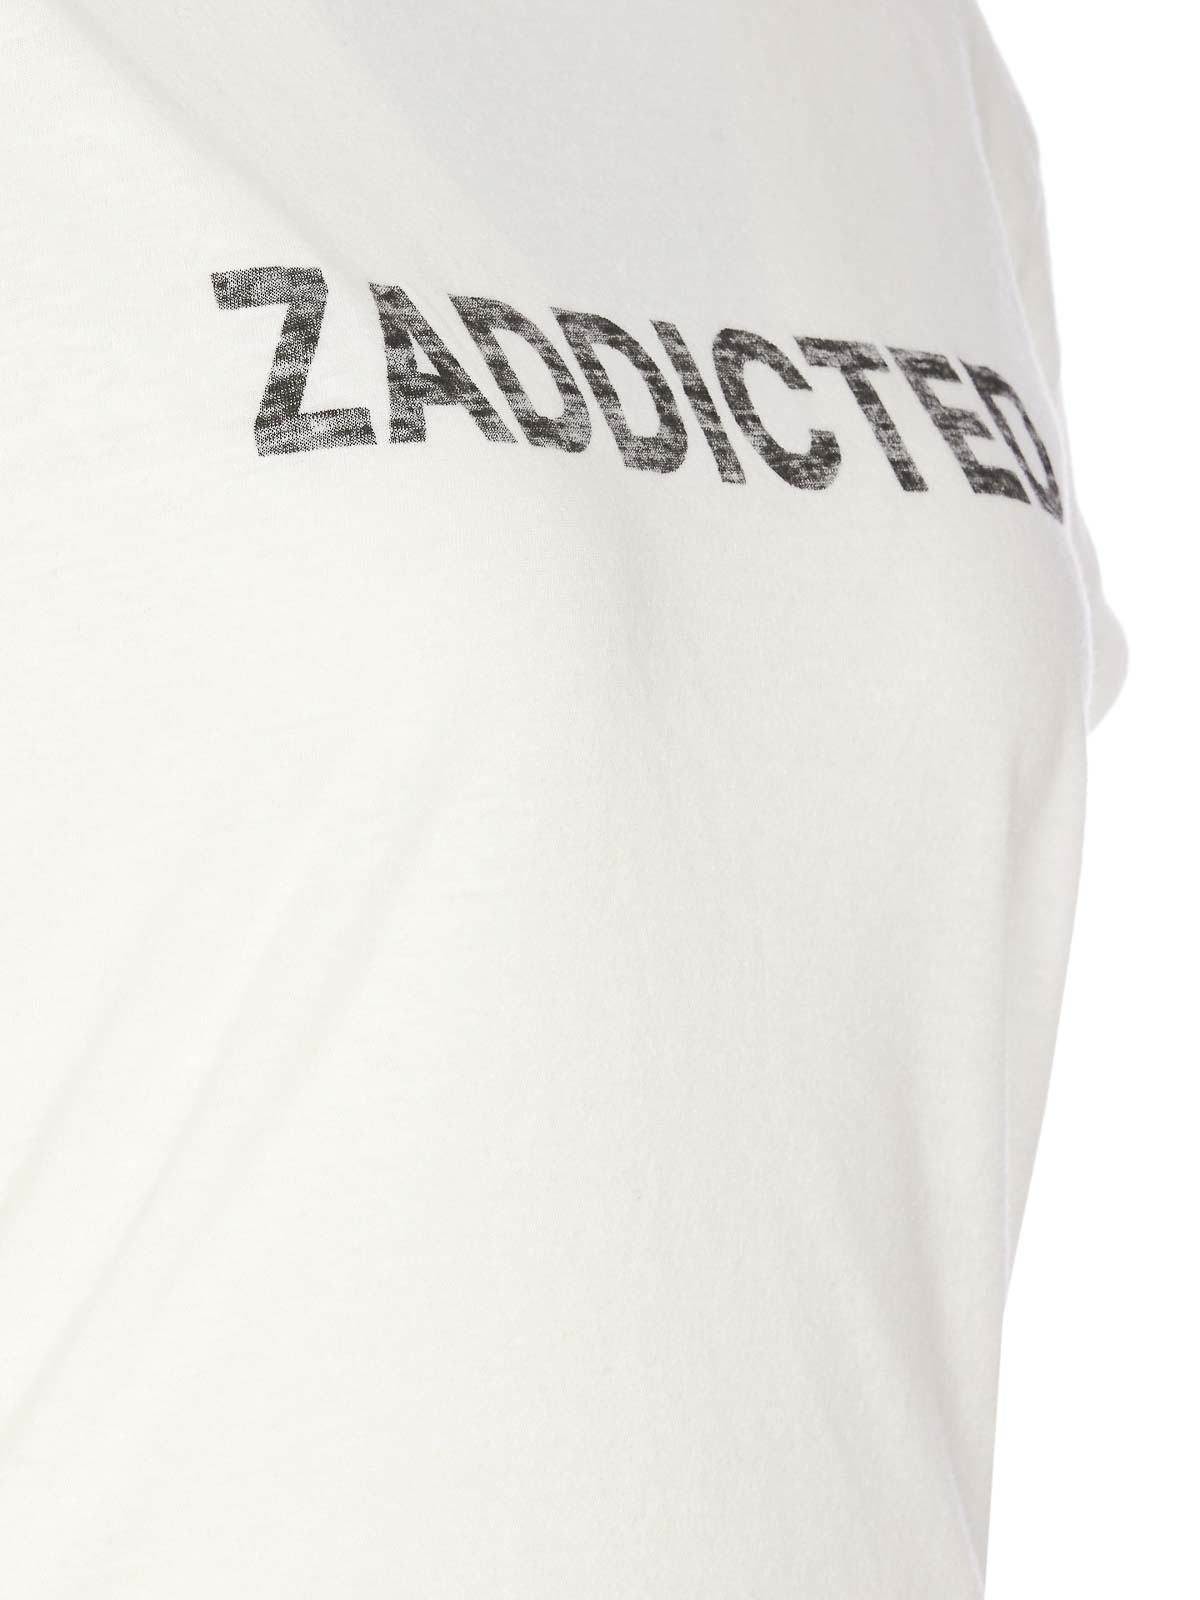 Shop Zadig & Voltaire Charlotte Zaddicted T-shirt In White